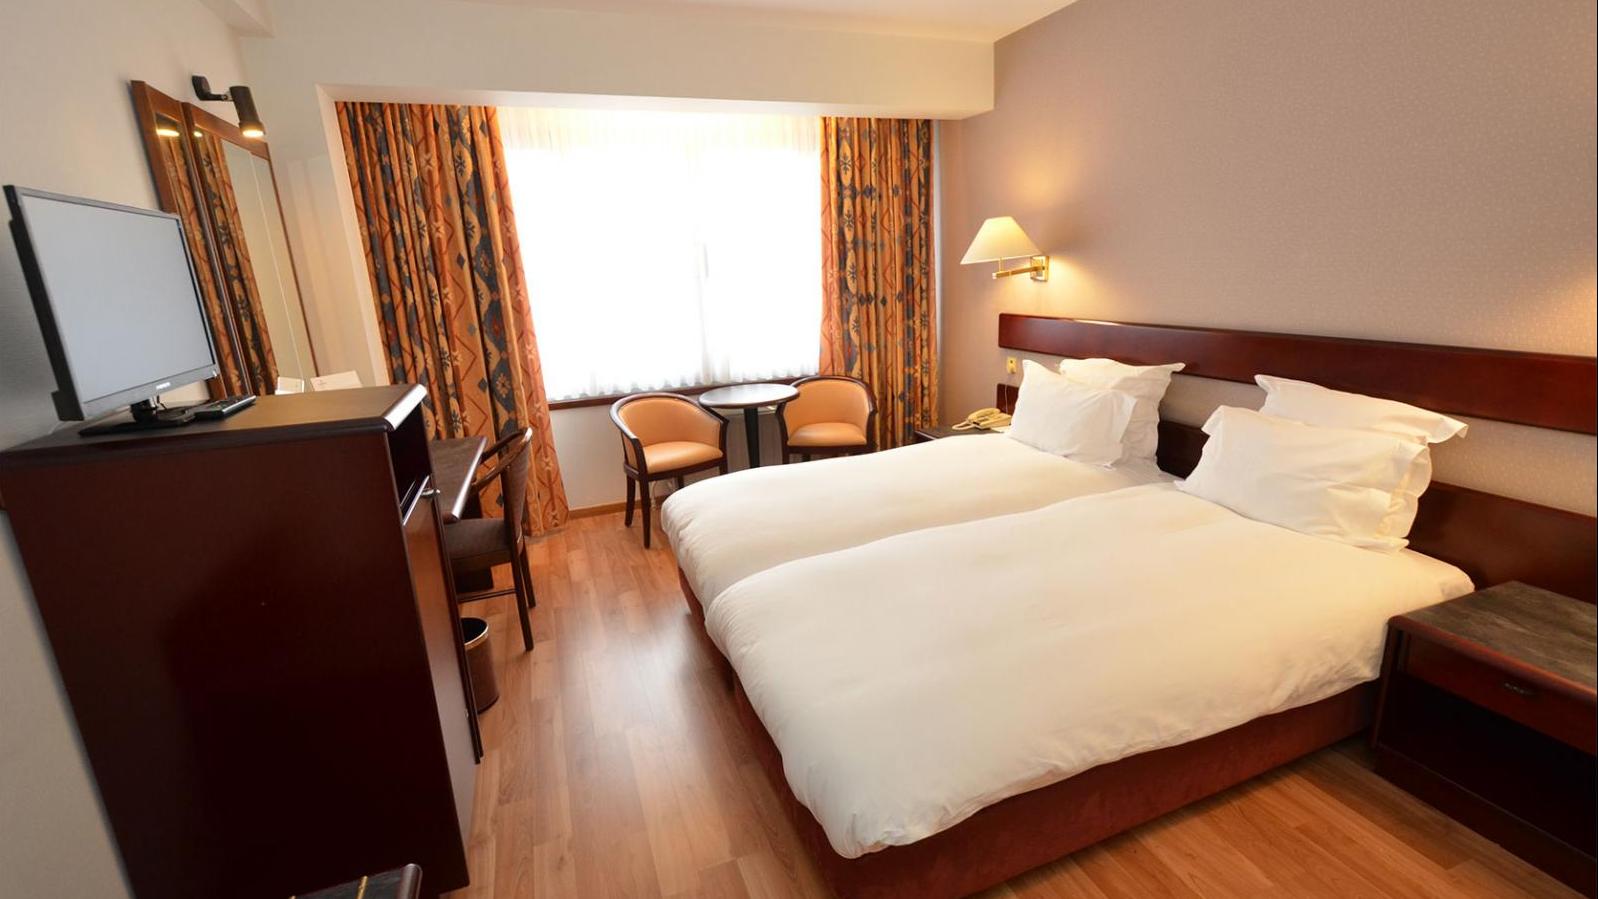 Standard Room - Bedford Hotel and Congress Centre